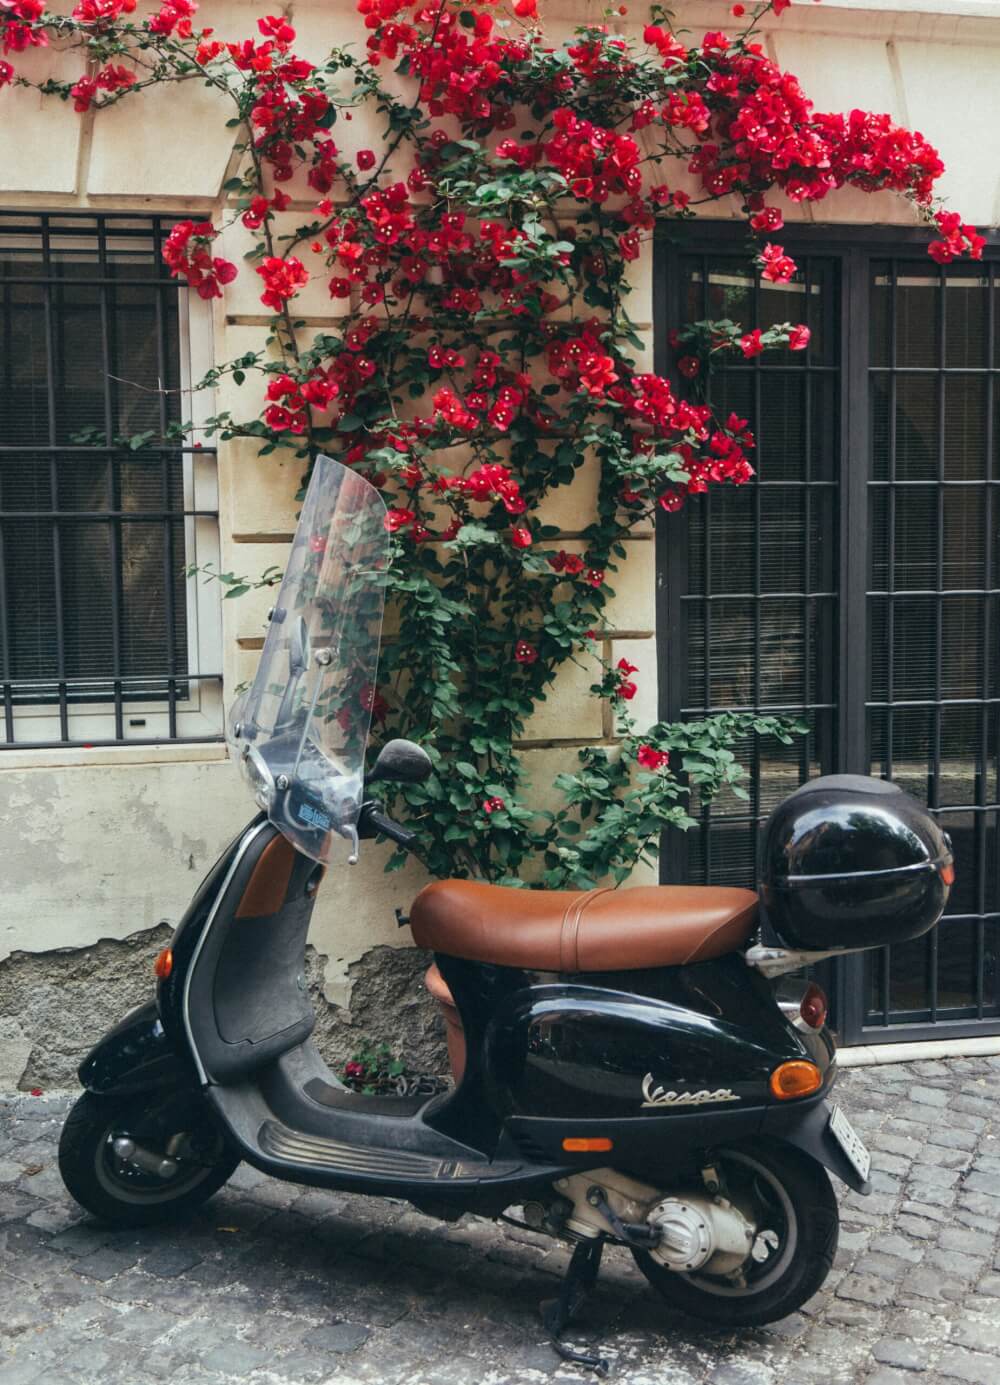 A black Vespa with a brown seat parked in front of a wall with red climbing flowers on it in Rome.